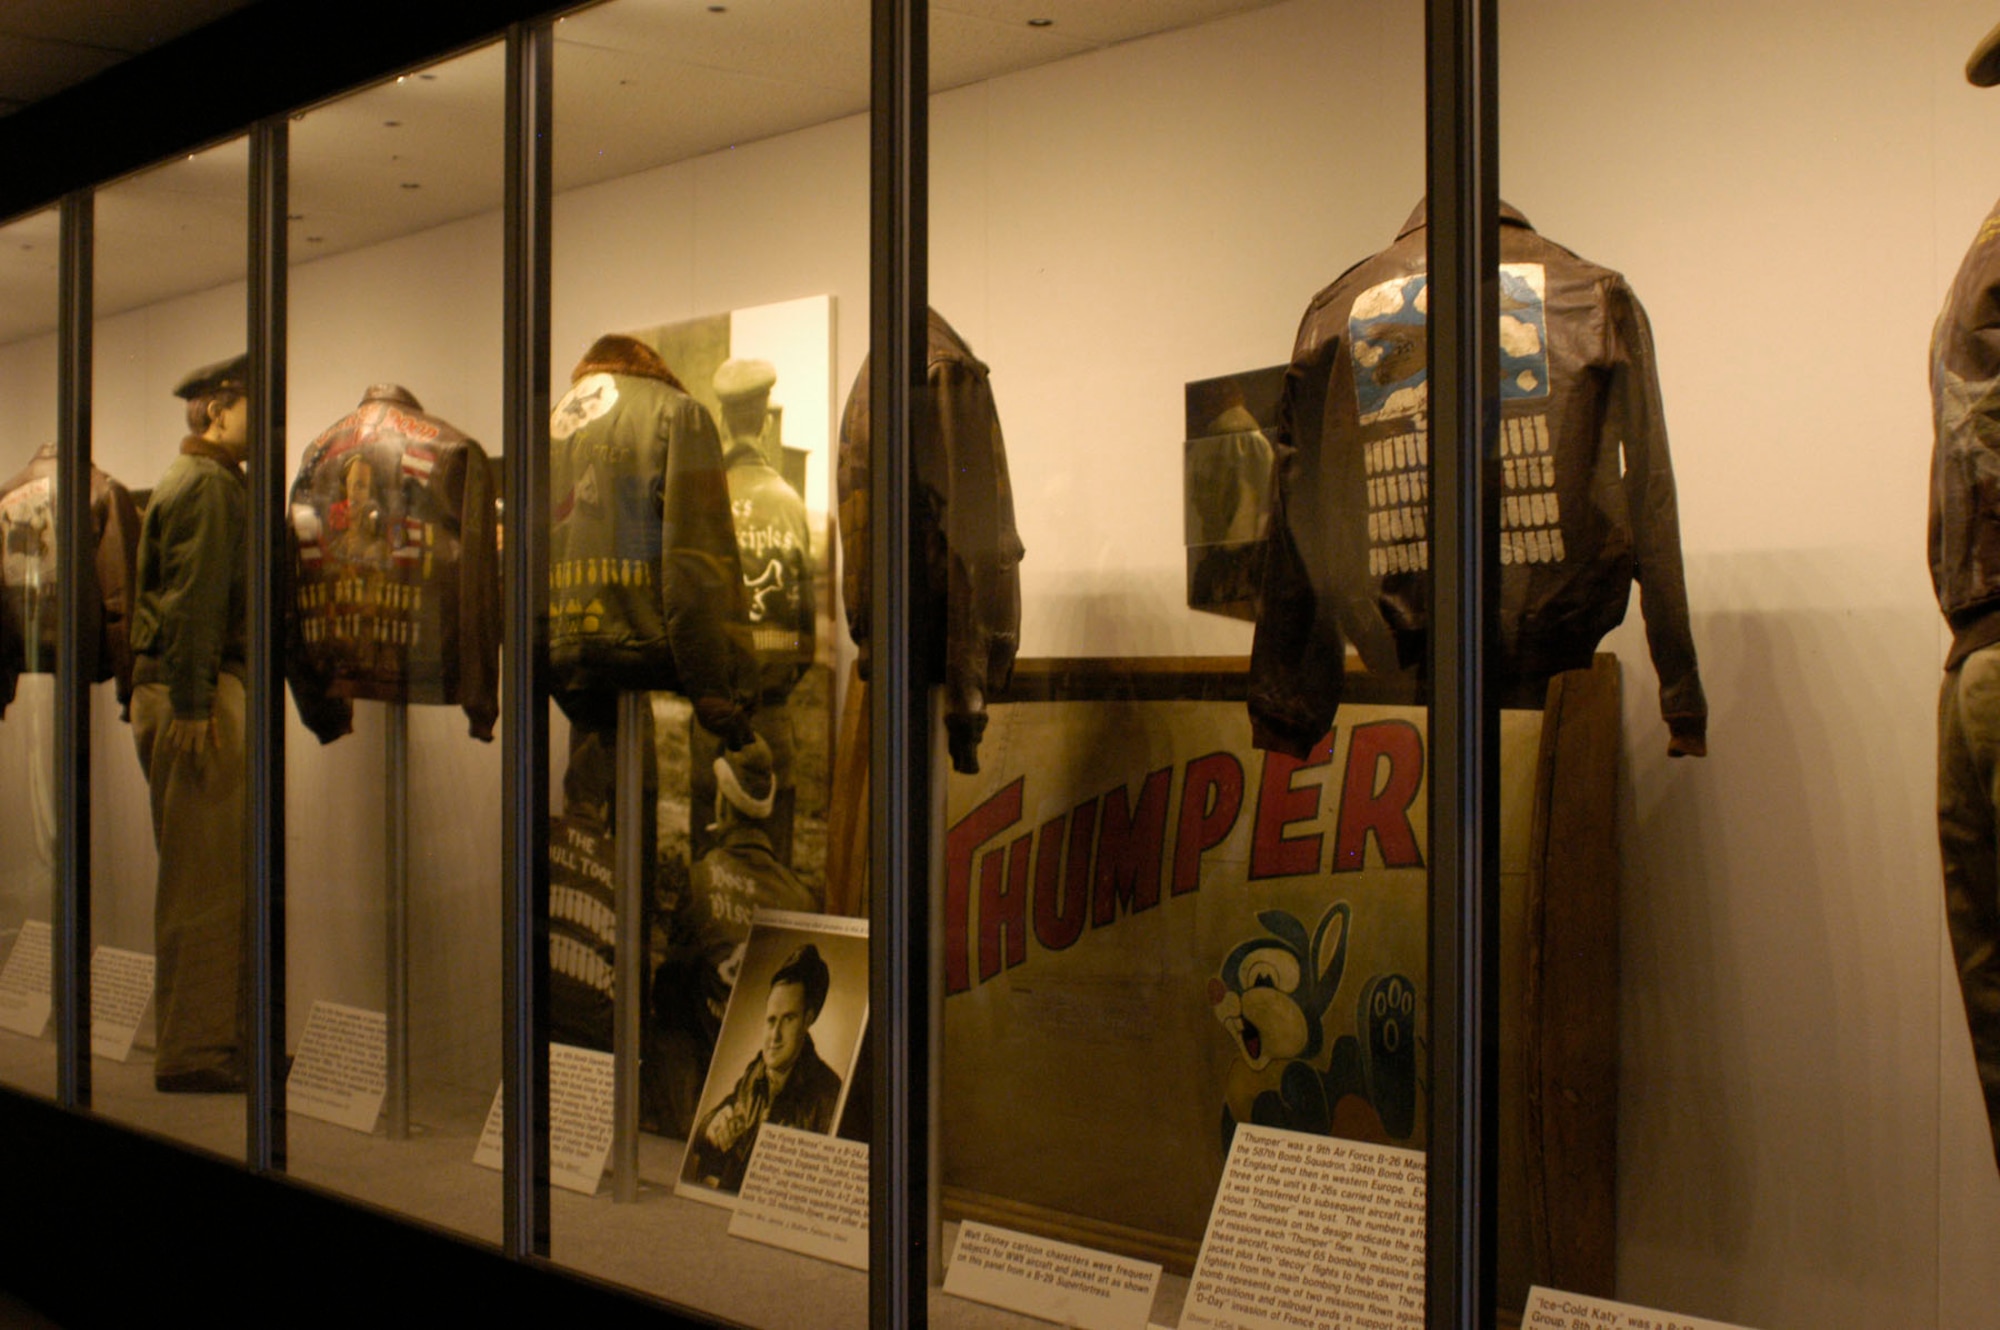 Evolution of USAF Flight Clothing exhibit at the National Museum of the U.S. Air Force. (U.S. Air Force photo)
